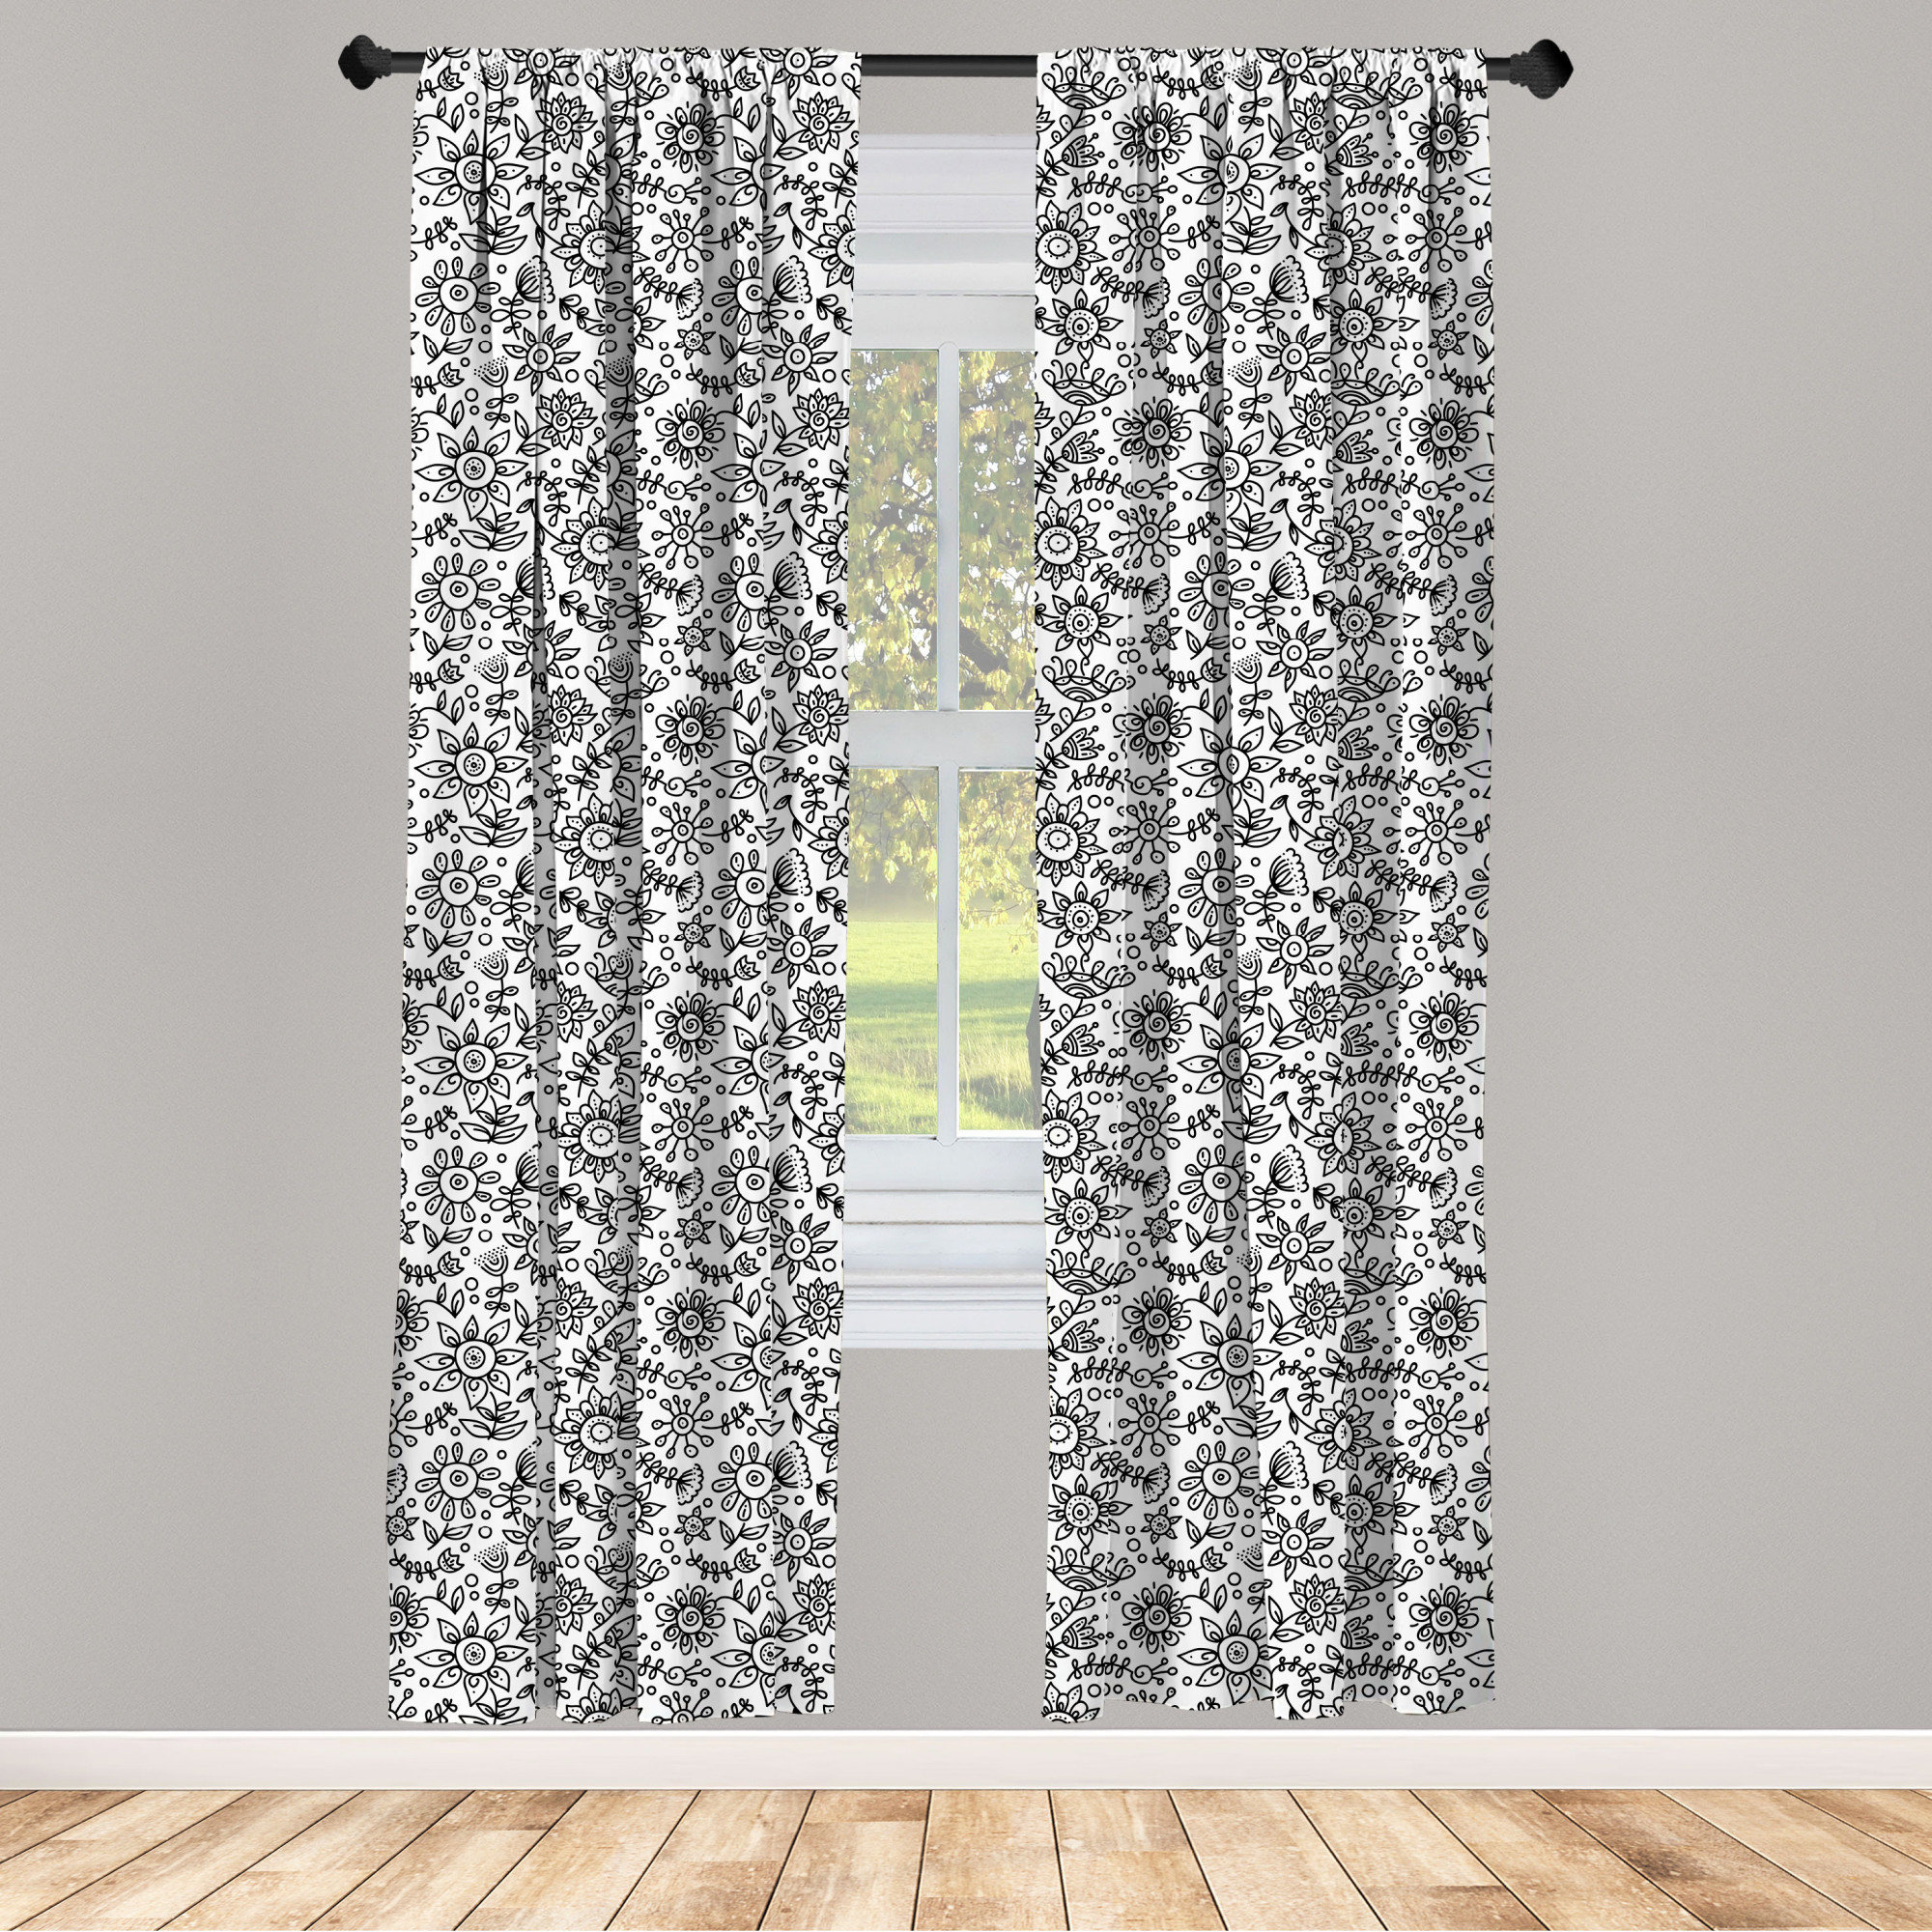 Window Drapes 5 Sizes 2 Panel Set by Ambesonne with Rod Pocket 